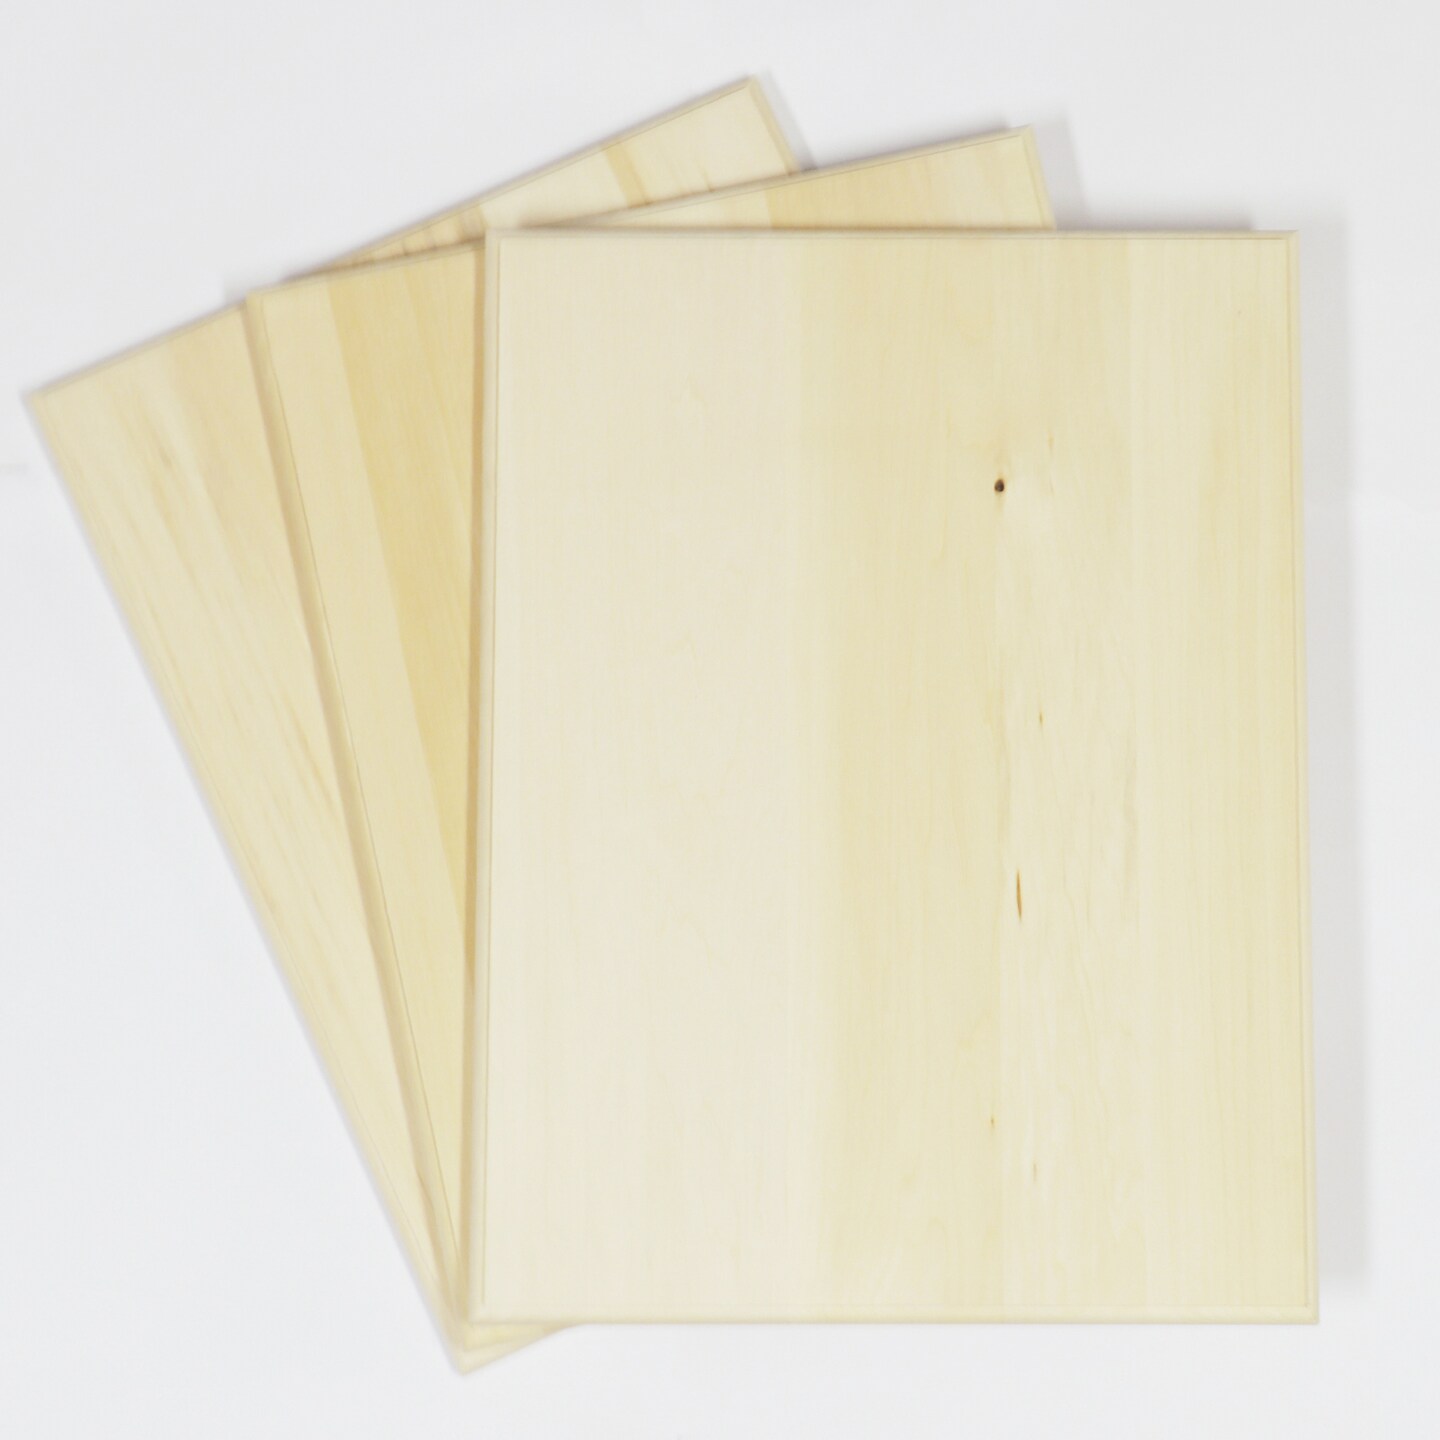 Wilson Basswood Plaques (12 Pack)